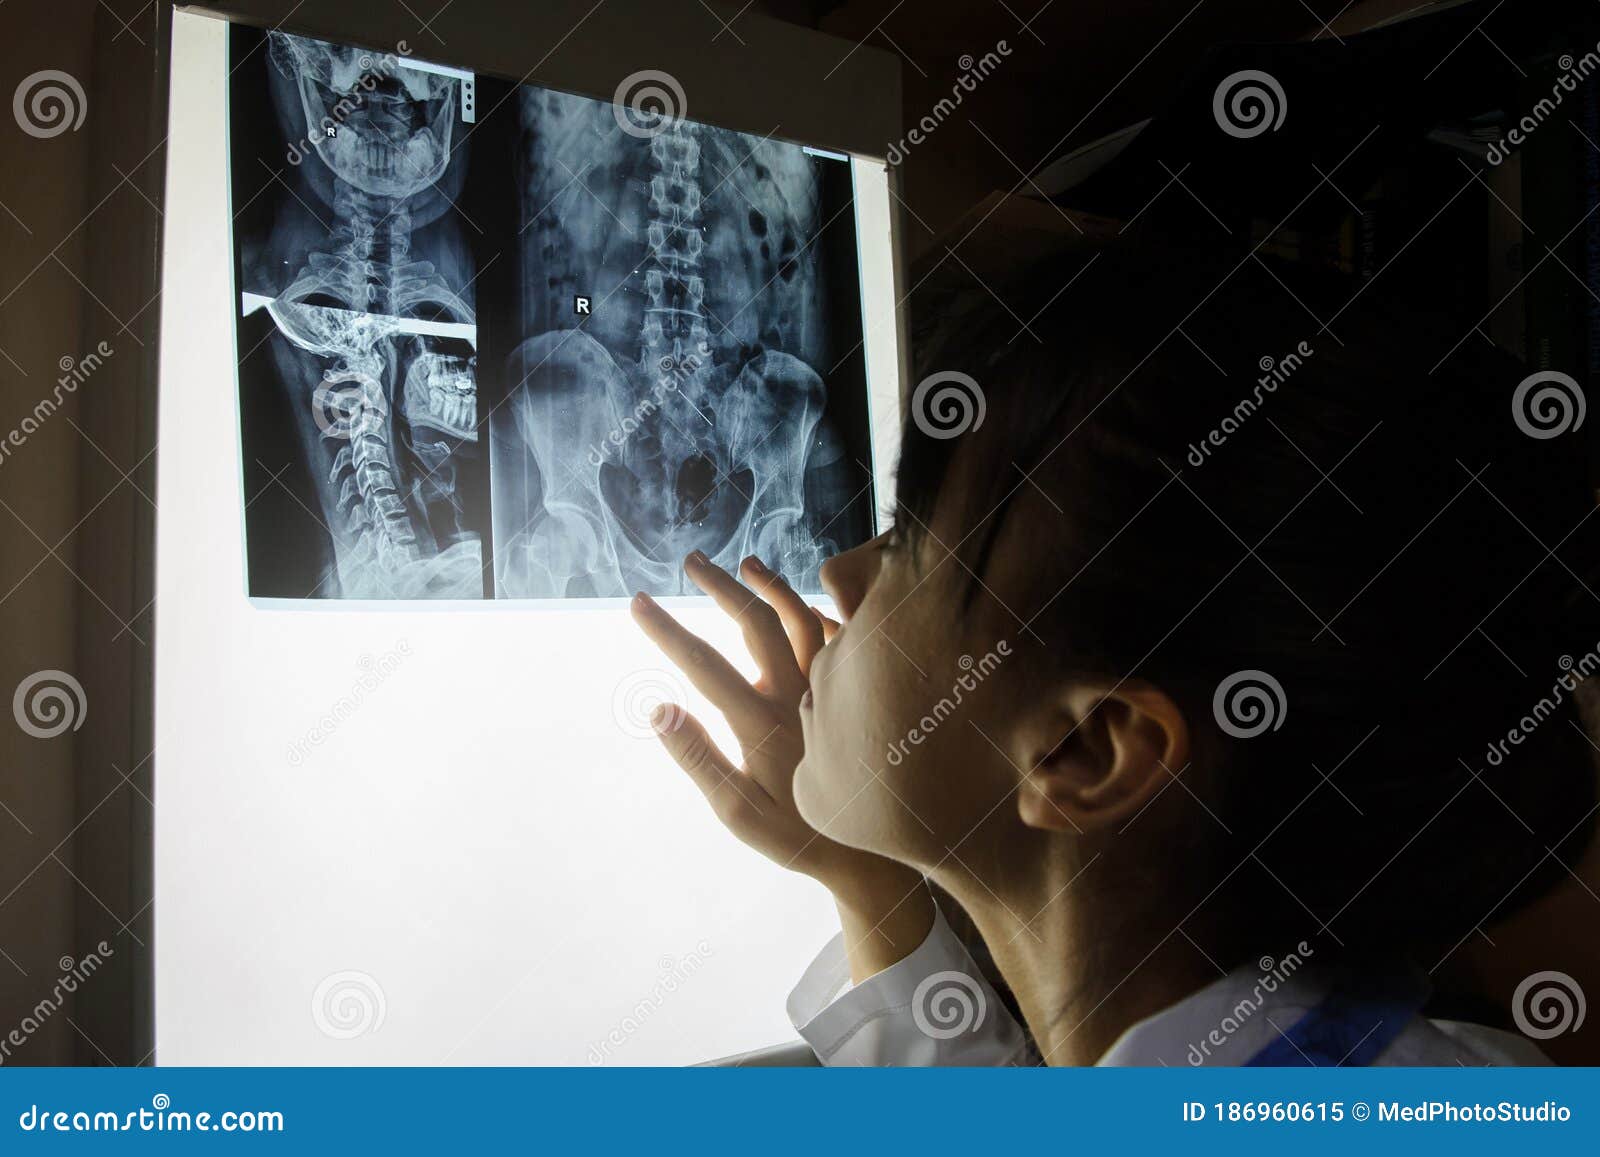 picture of a woman doctor exploring spinal x-ray: lumbar and cervical region